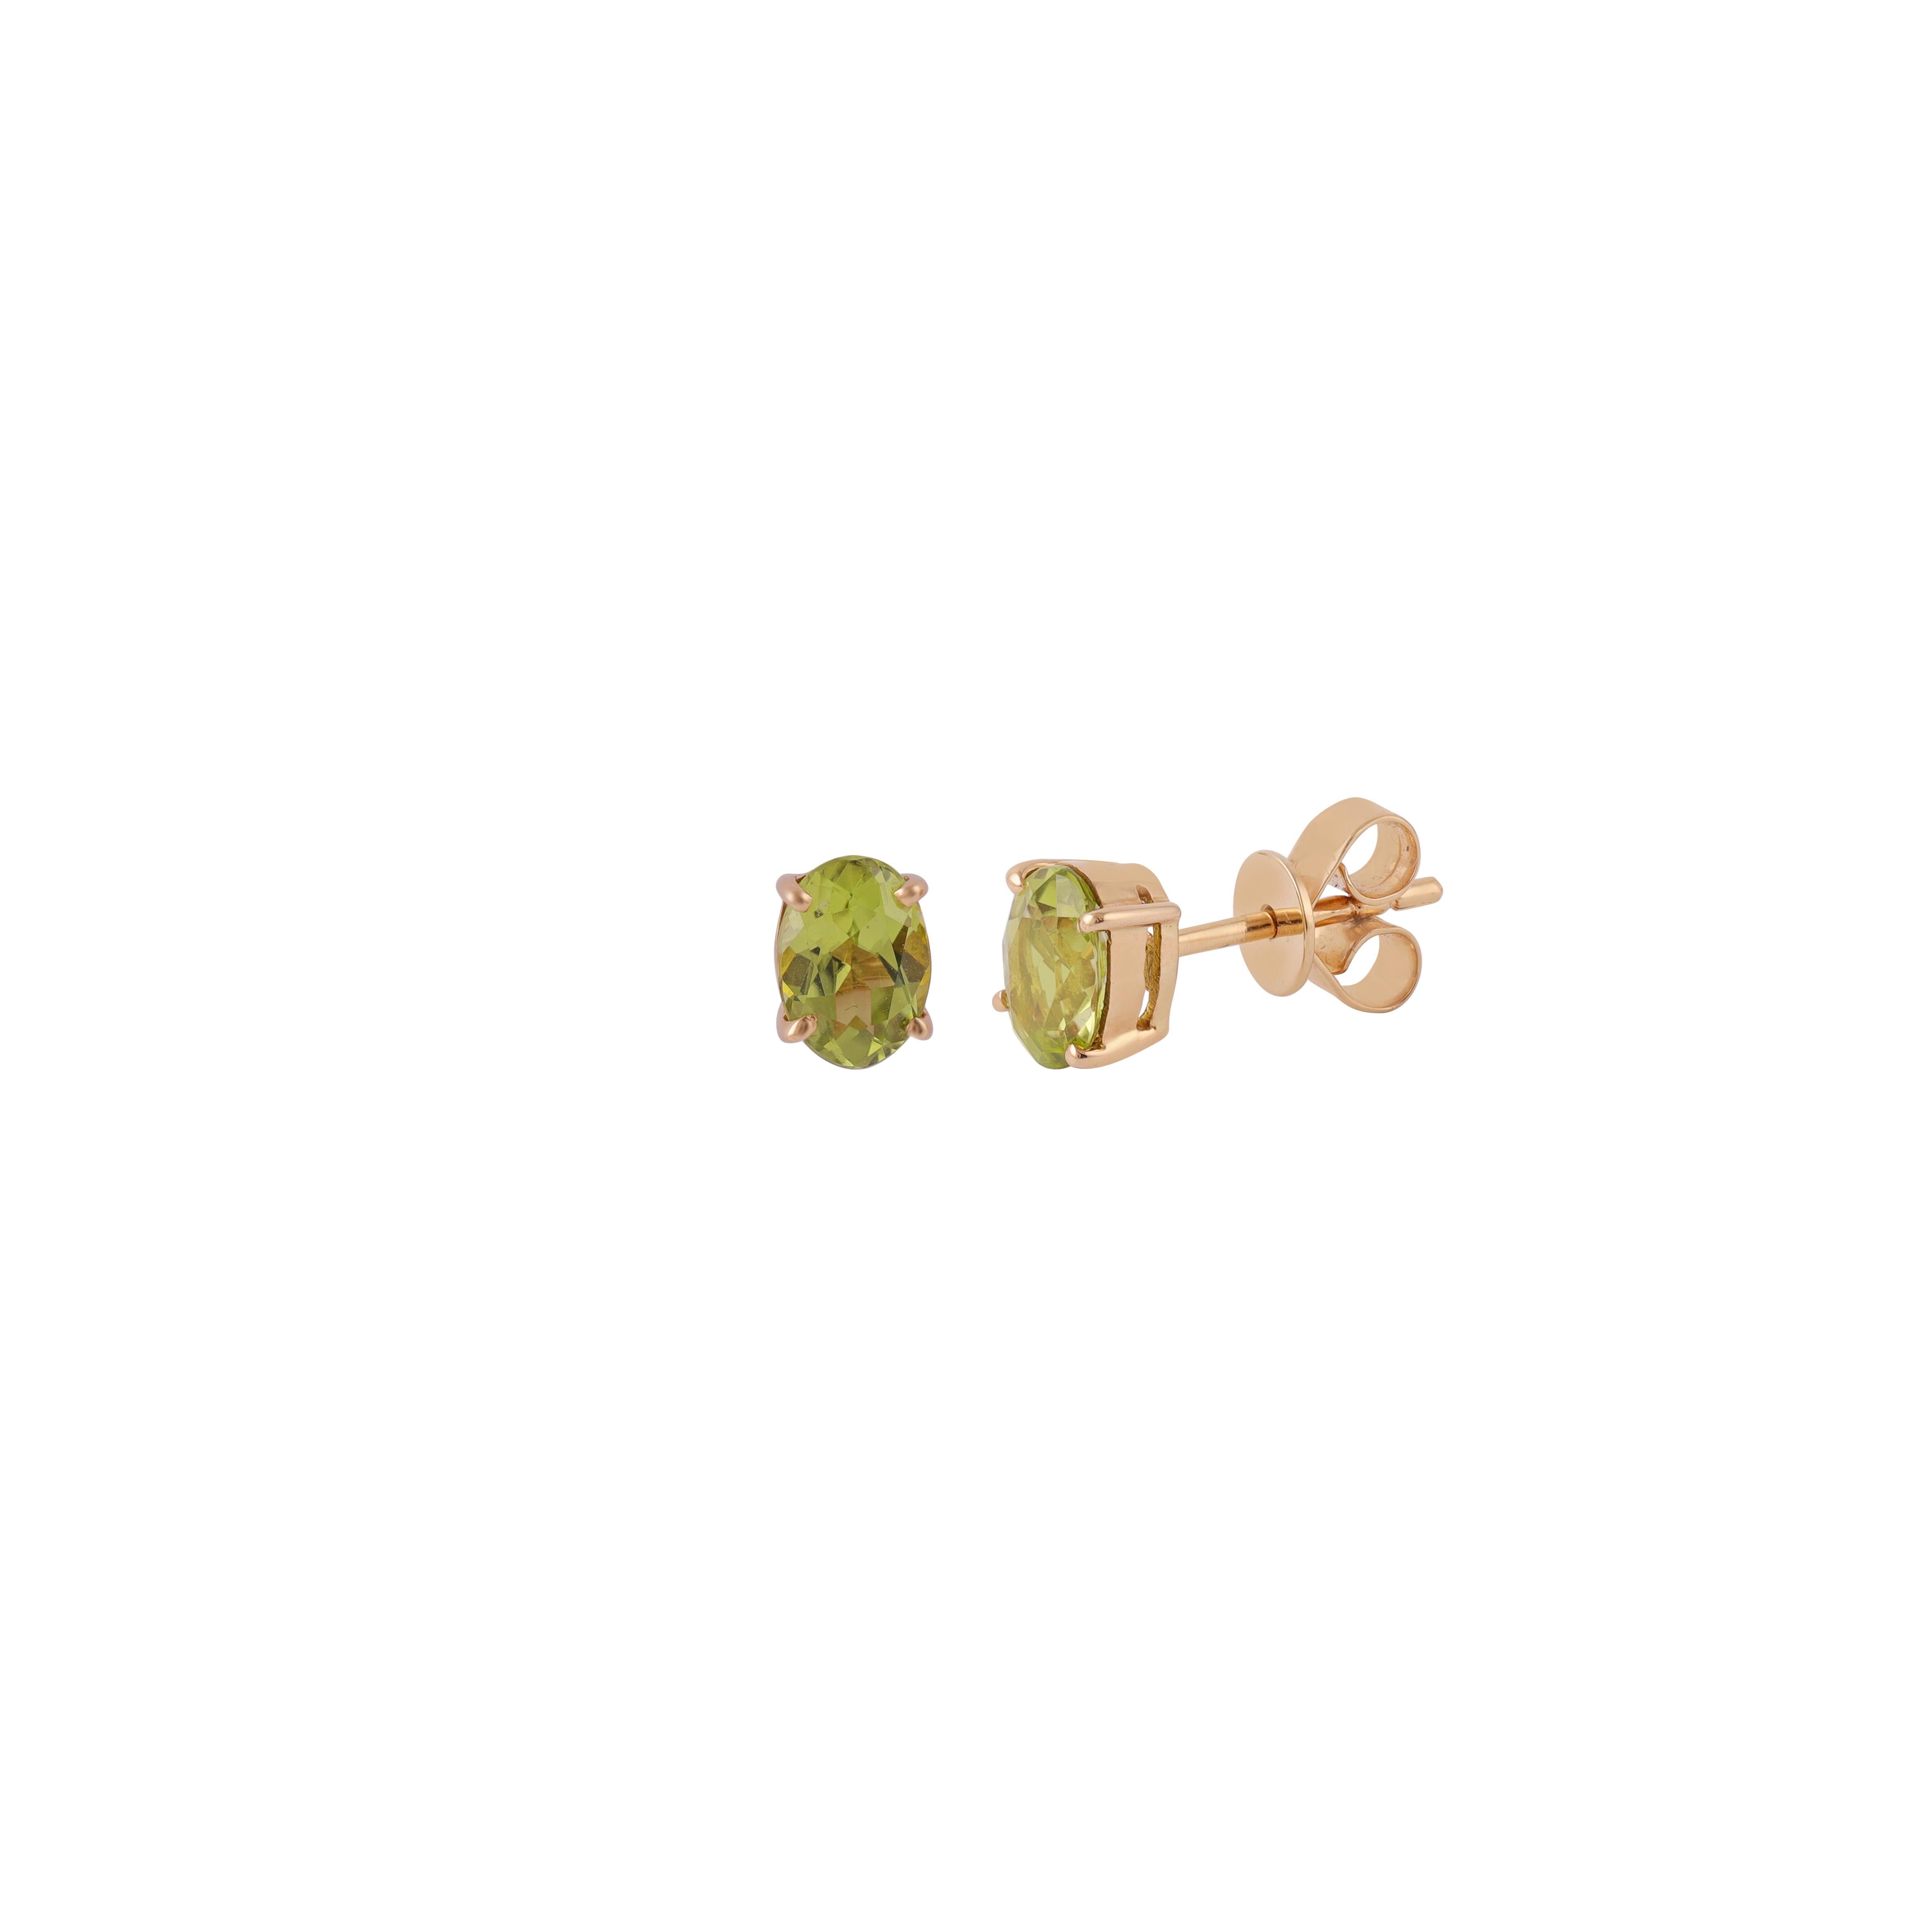 Contemporary 2.06 Carat Peridot Stud Earrings in 18k Yellow Gold For Sale